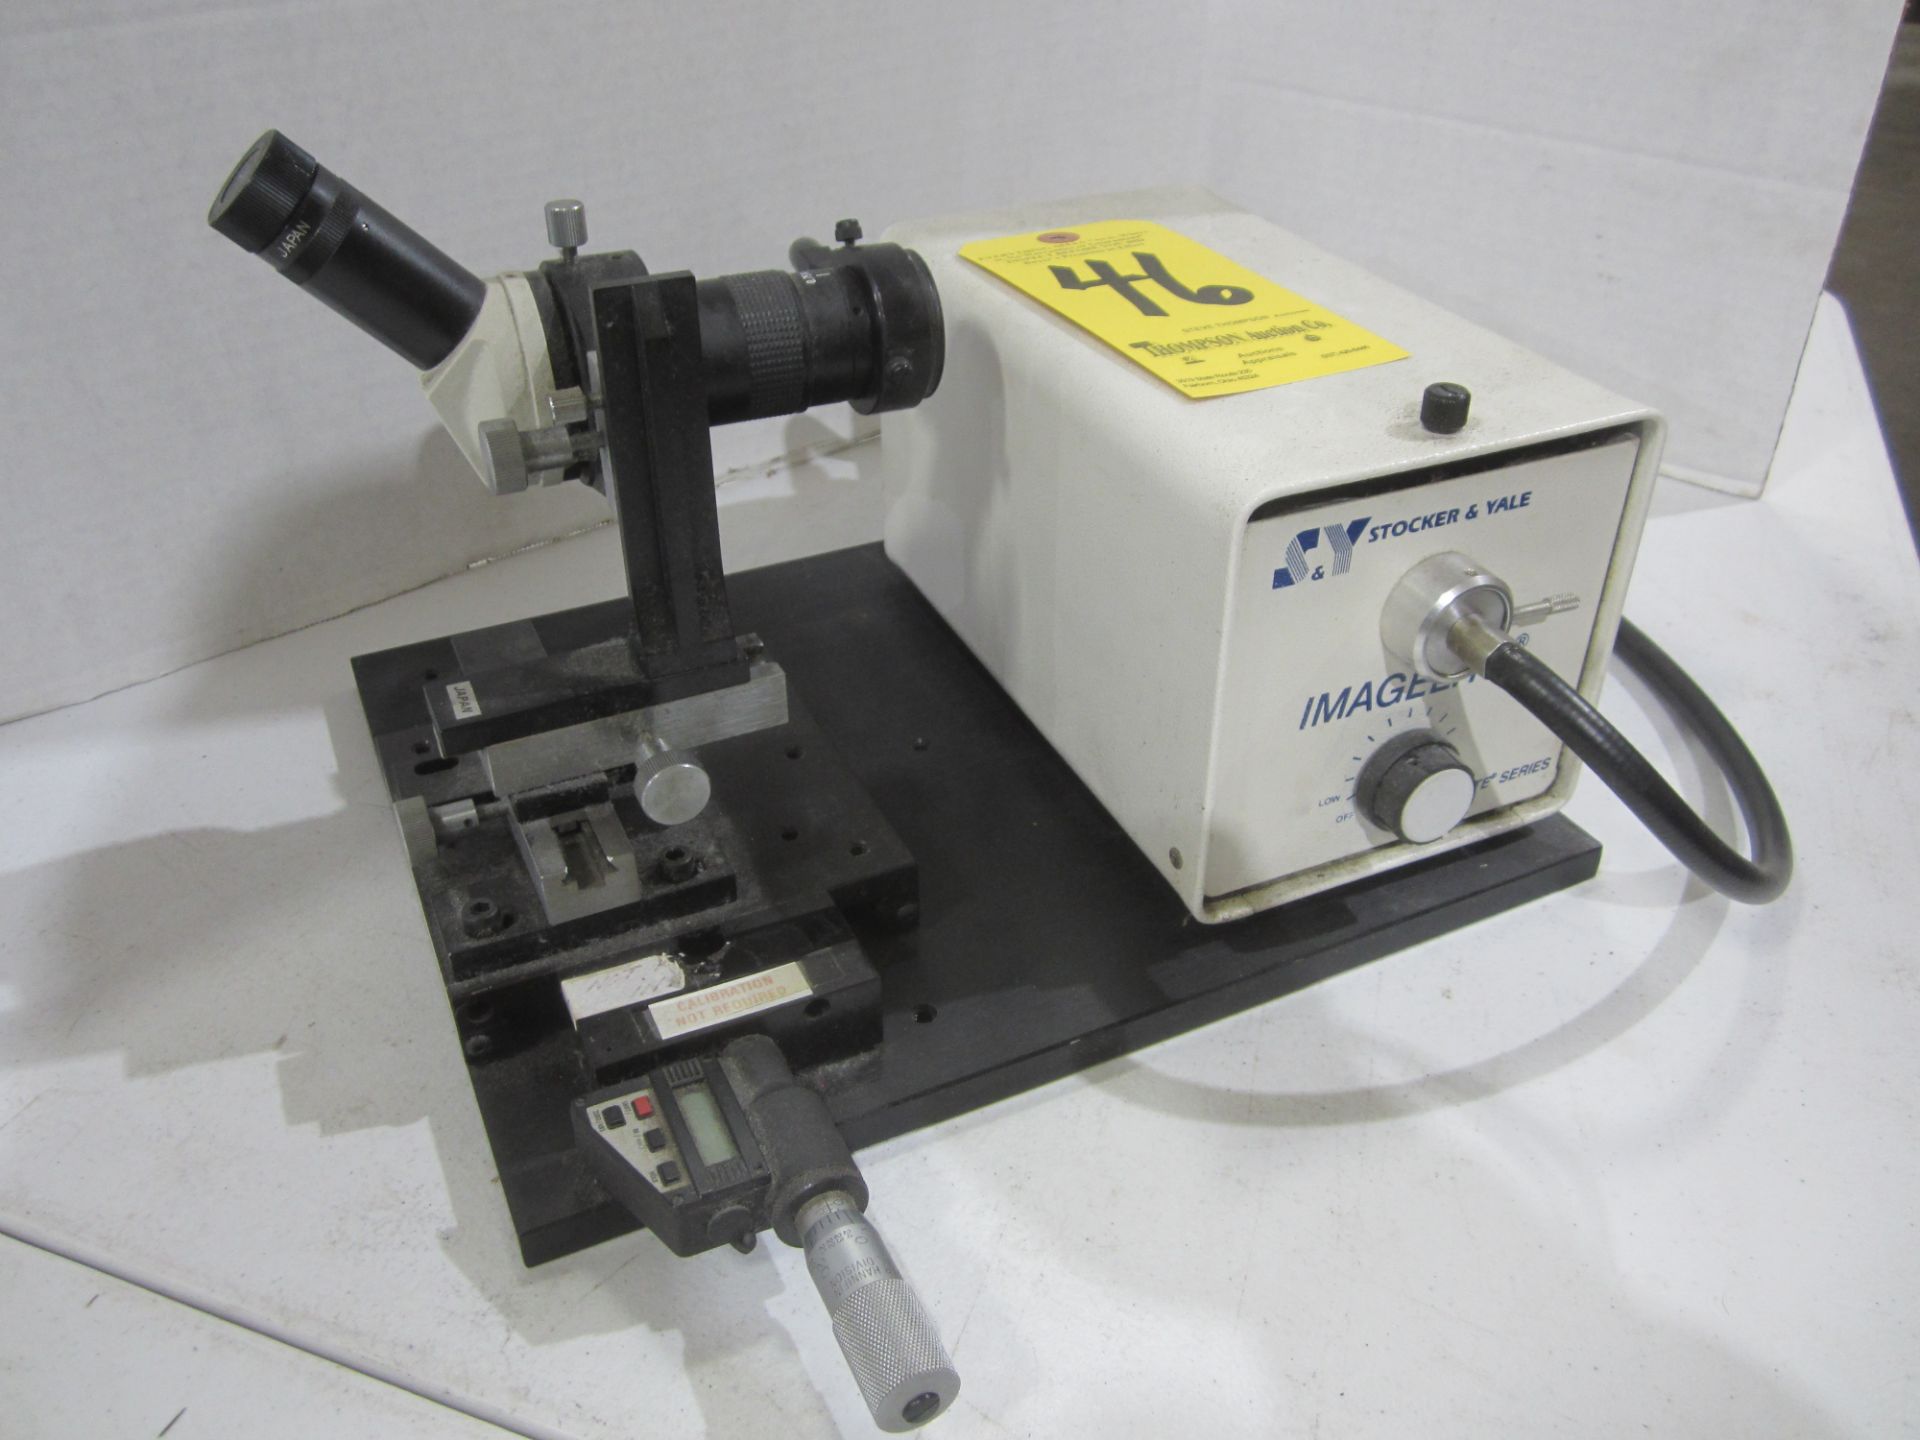 Tool Setting Scope with Stocker & Yale High Intensity Light Source